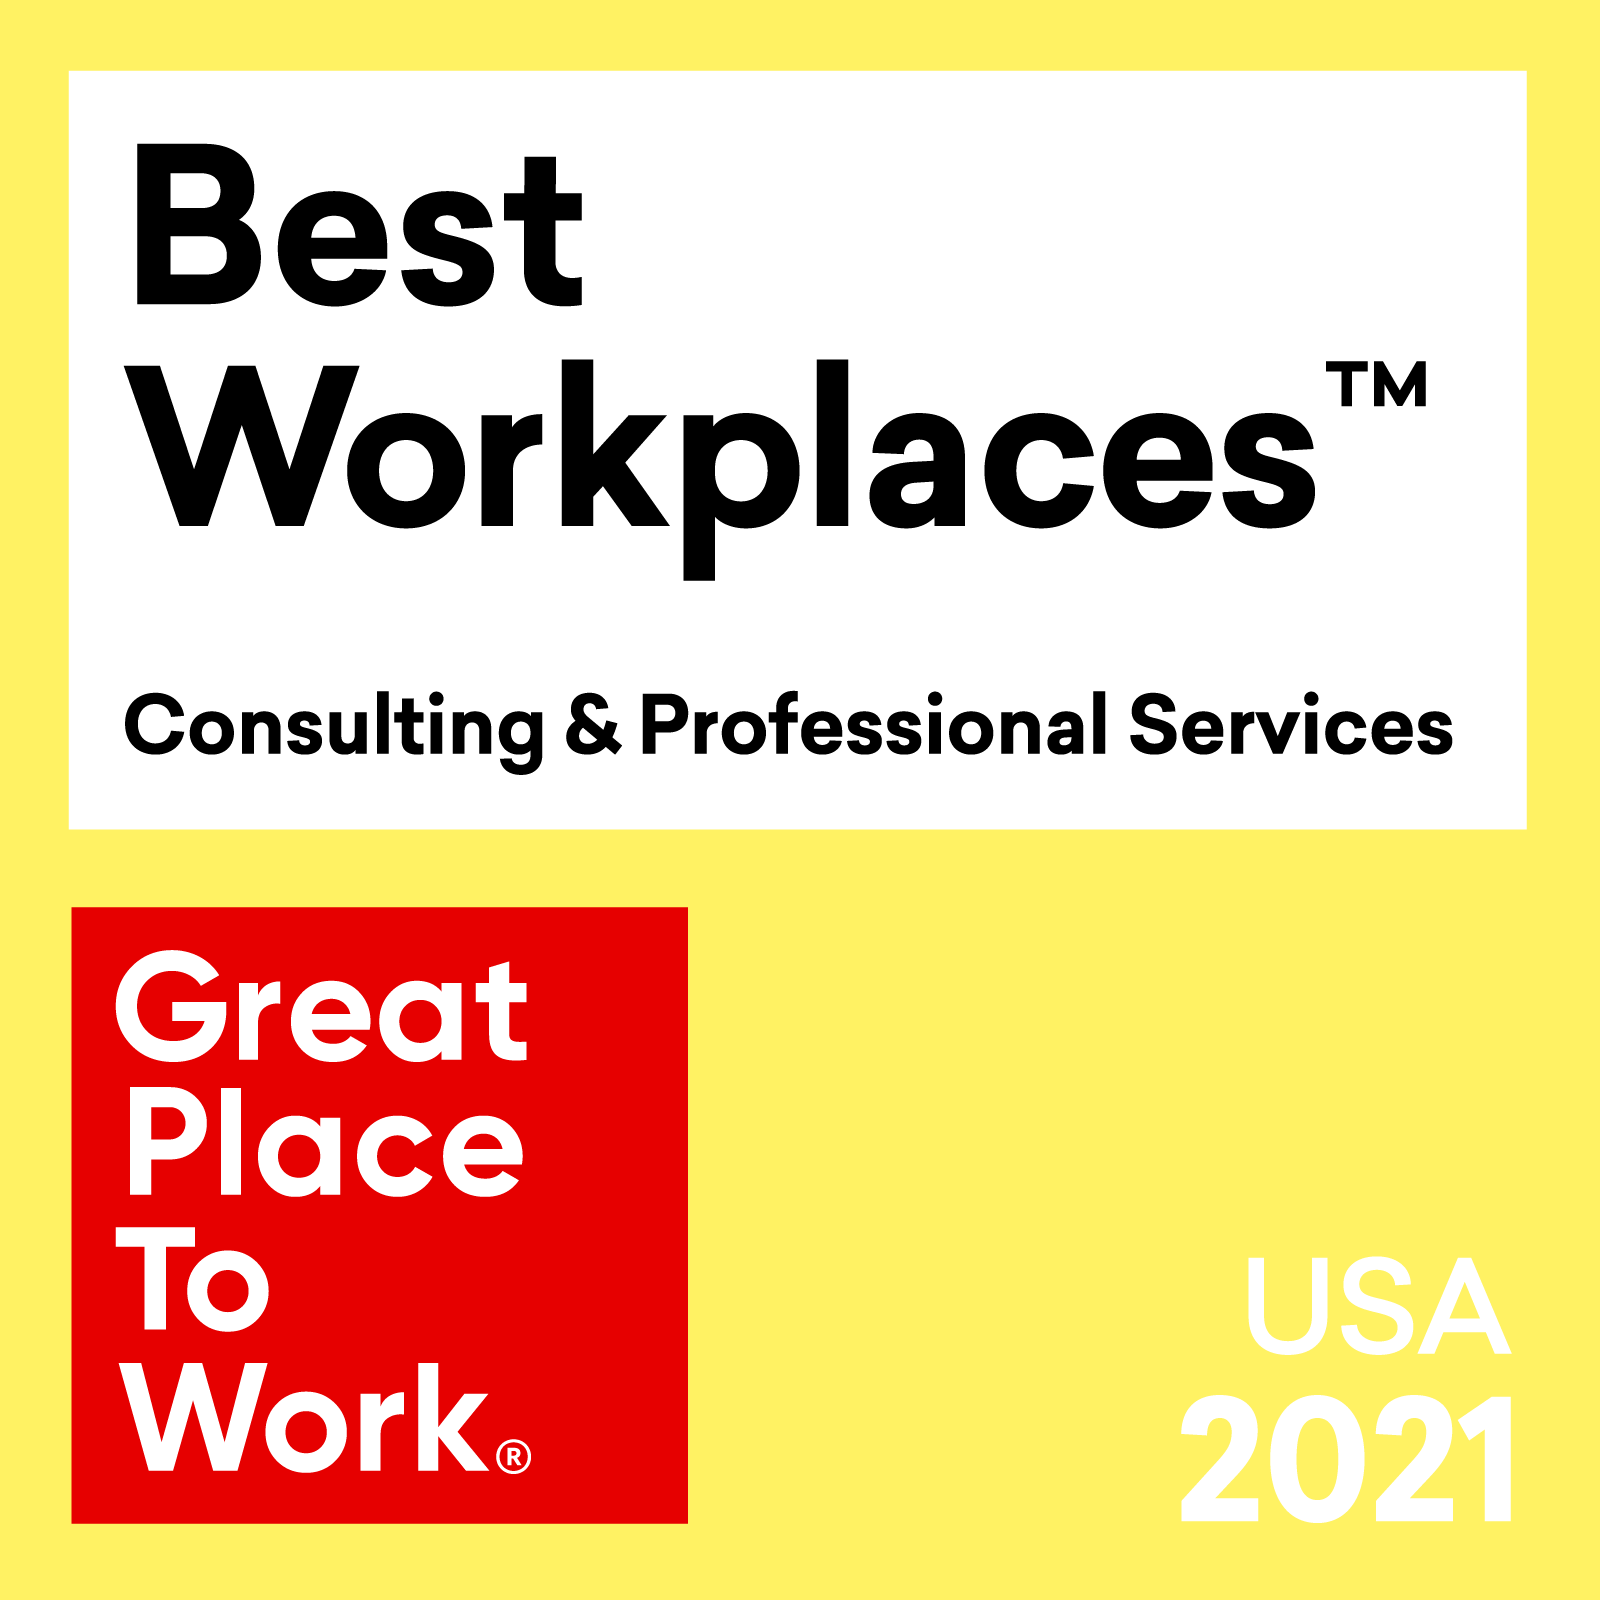 Best Workplace In Consulting & Professional Services